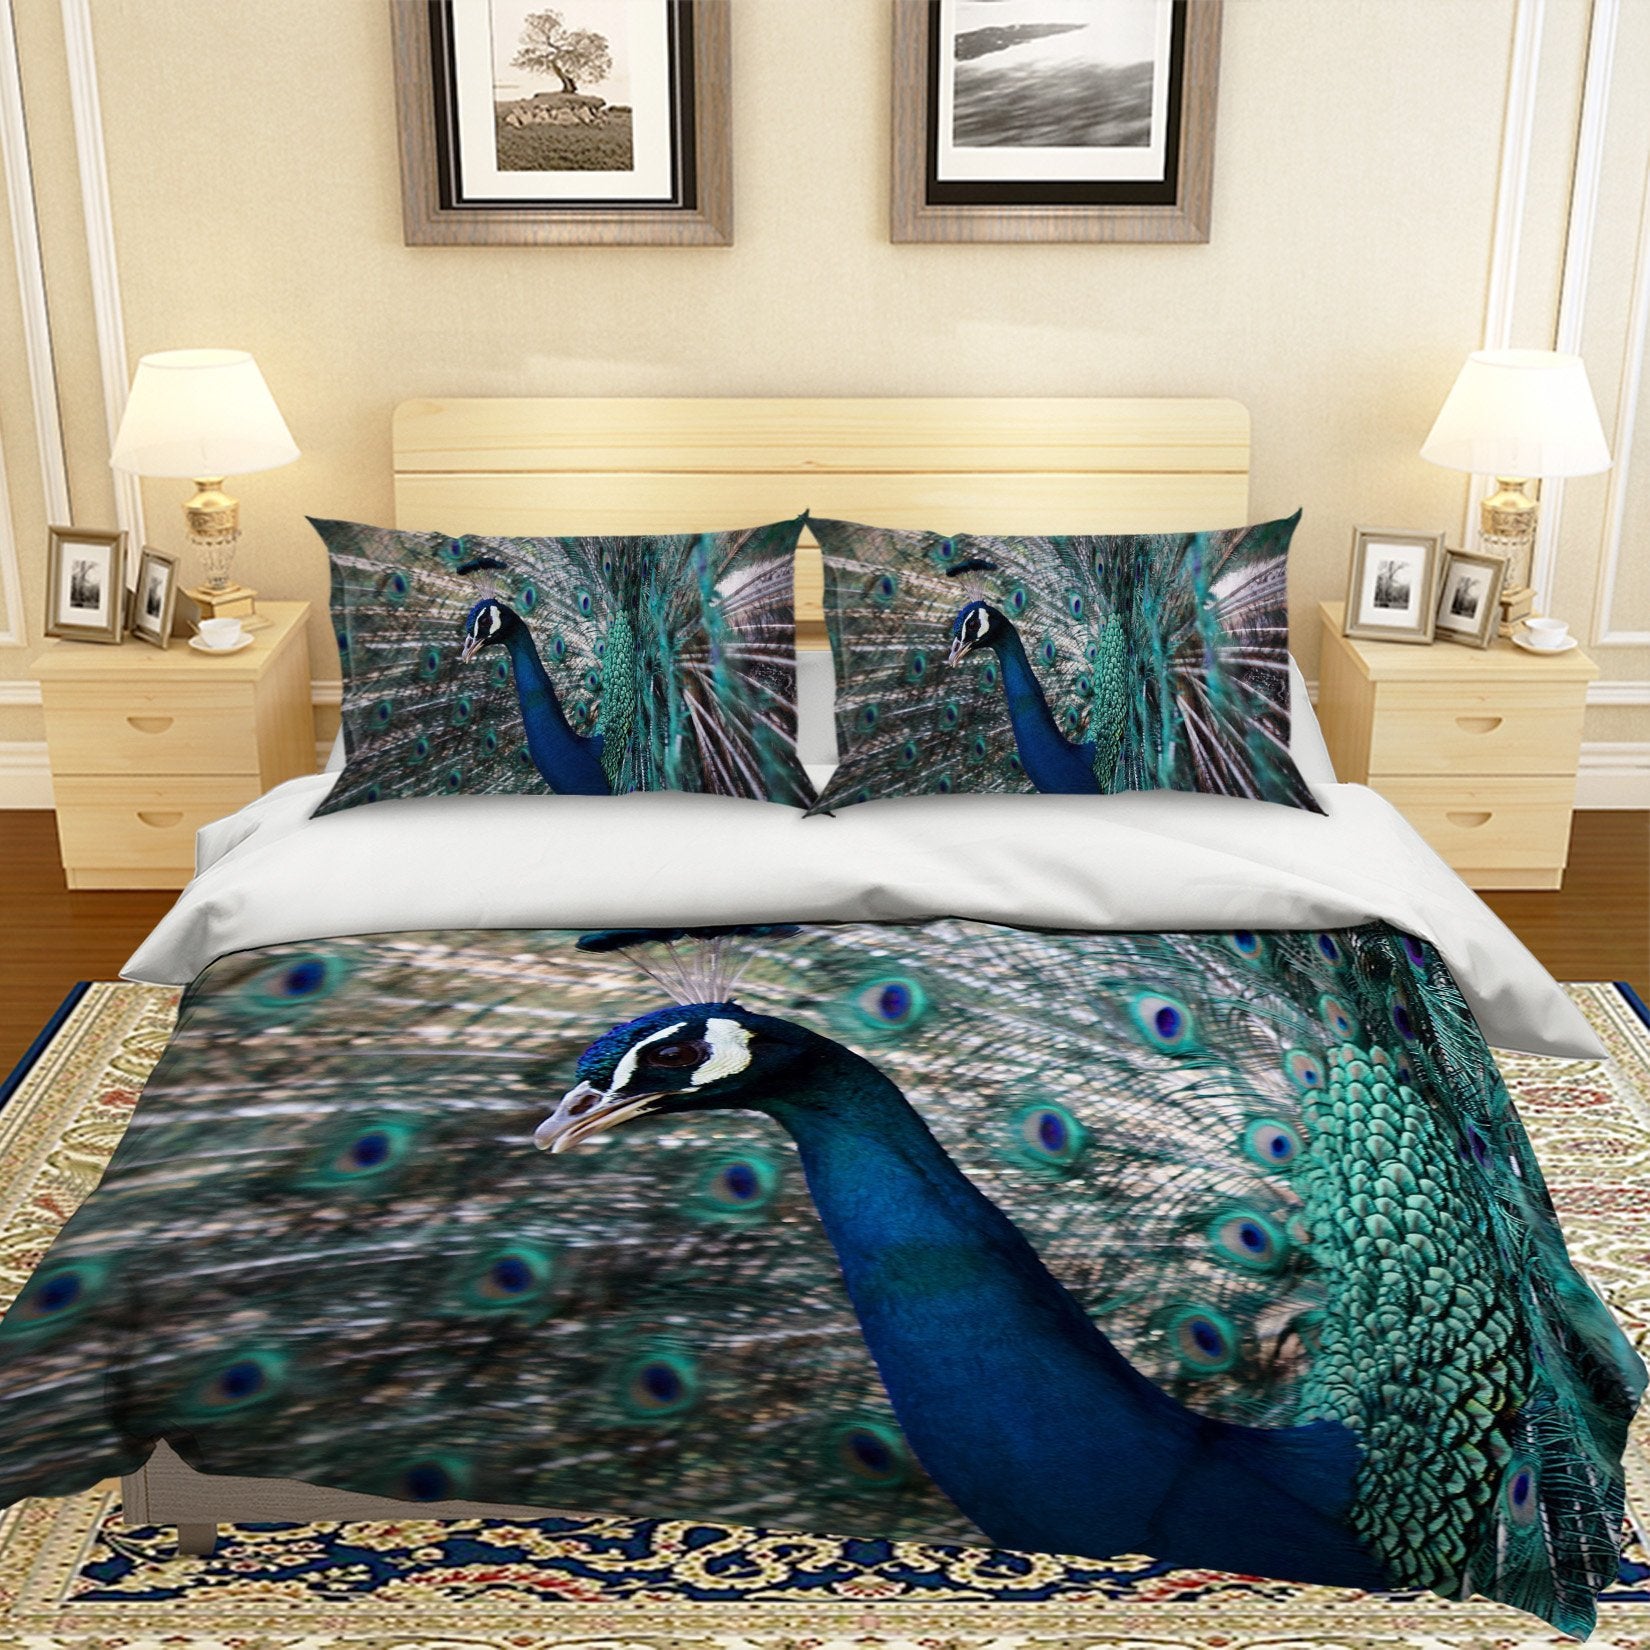 3D Opening Tail Peacock 1982 Bed Pillowcases Quilt Quiet Covers AJ Creativity Home 